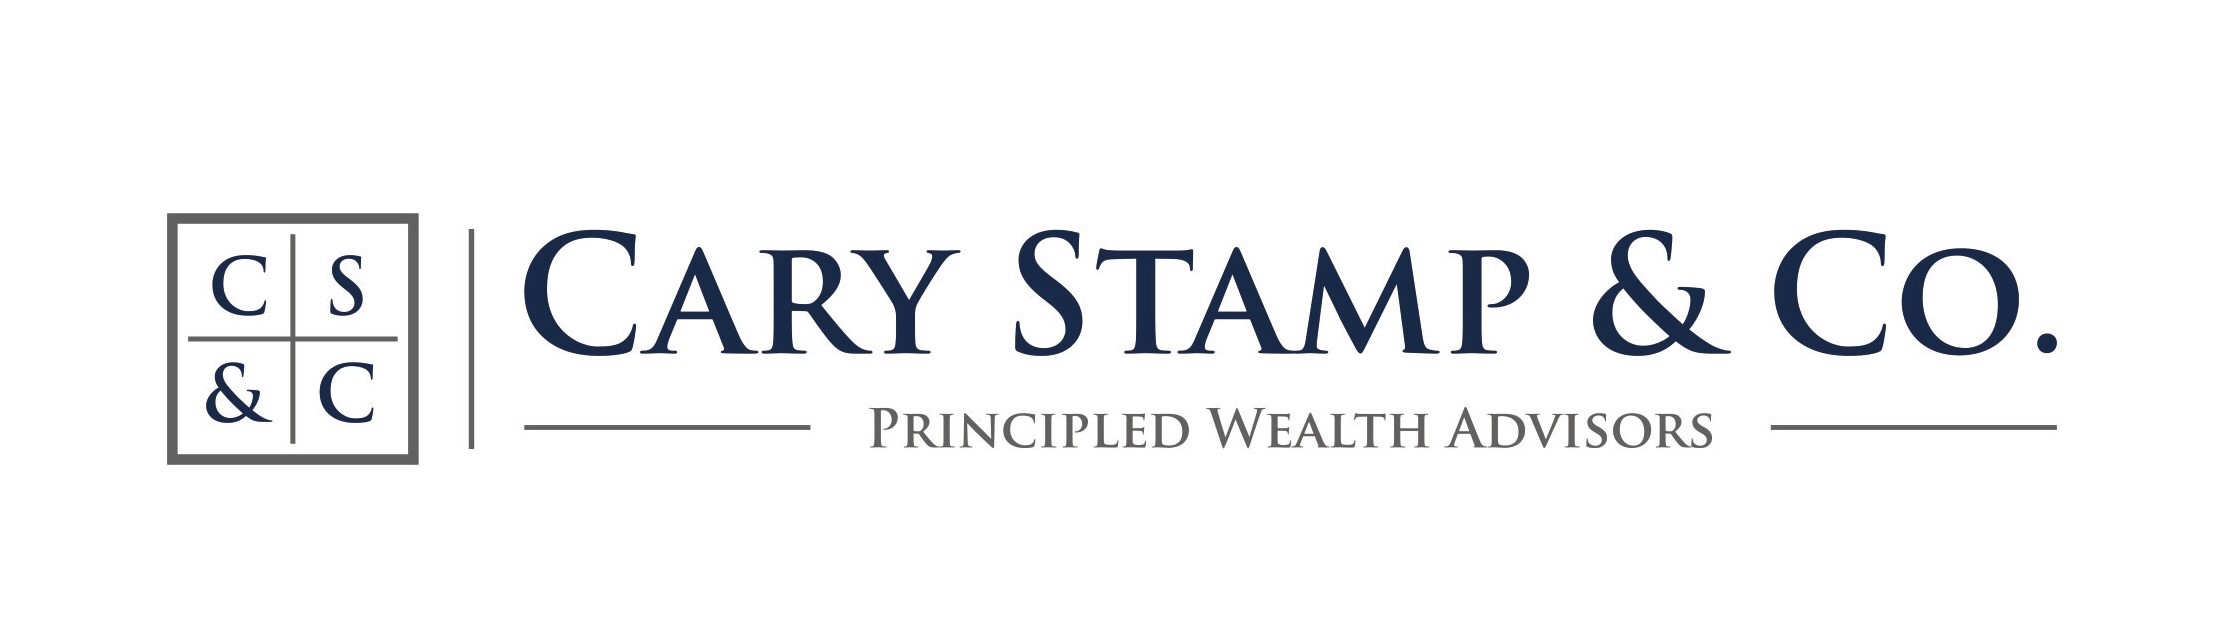 Cary Stamp & CO